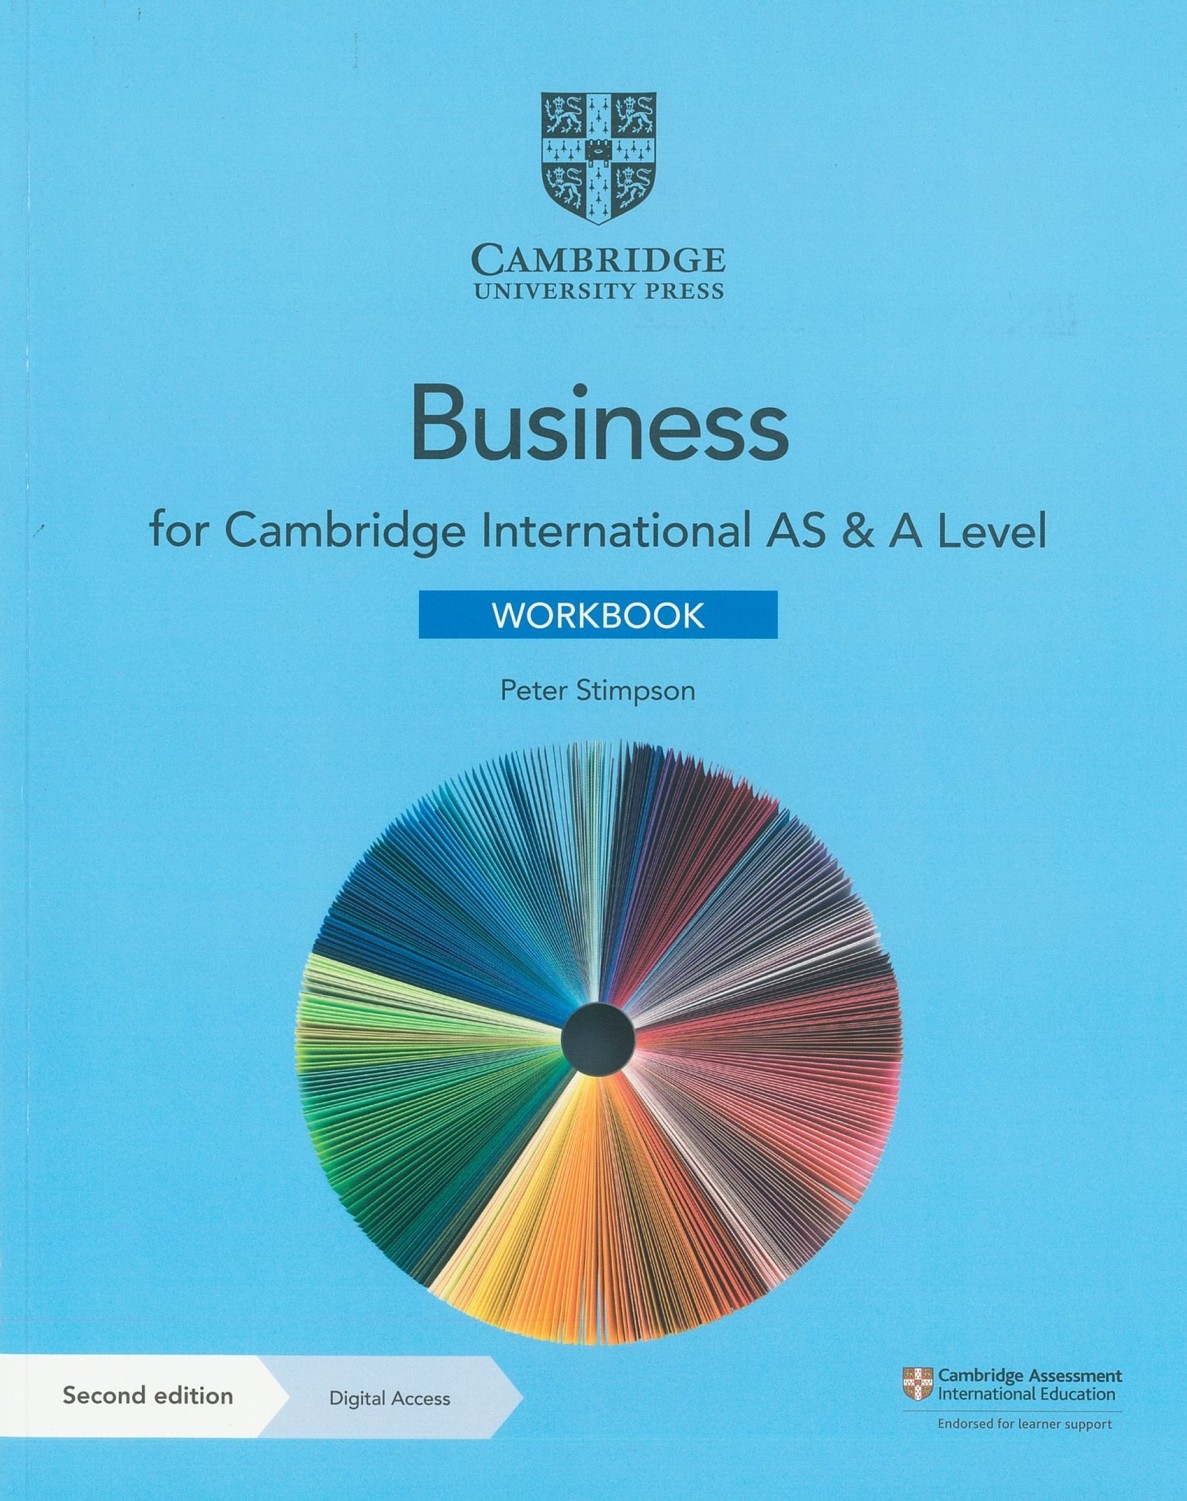 CUP - AS & A LEVEL BUSINESS WORKBOOK - STIMPSON